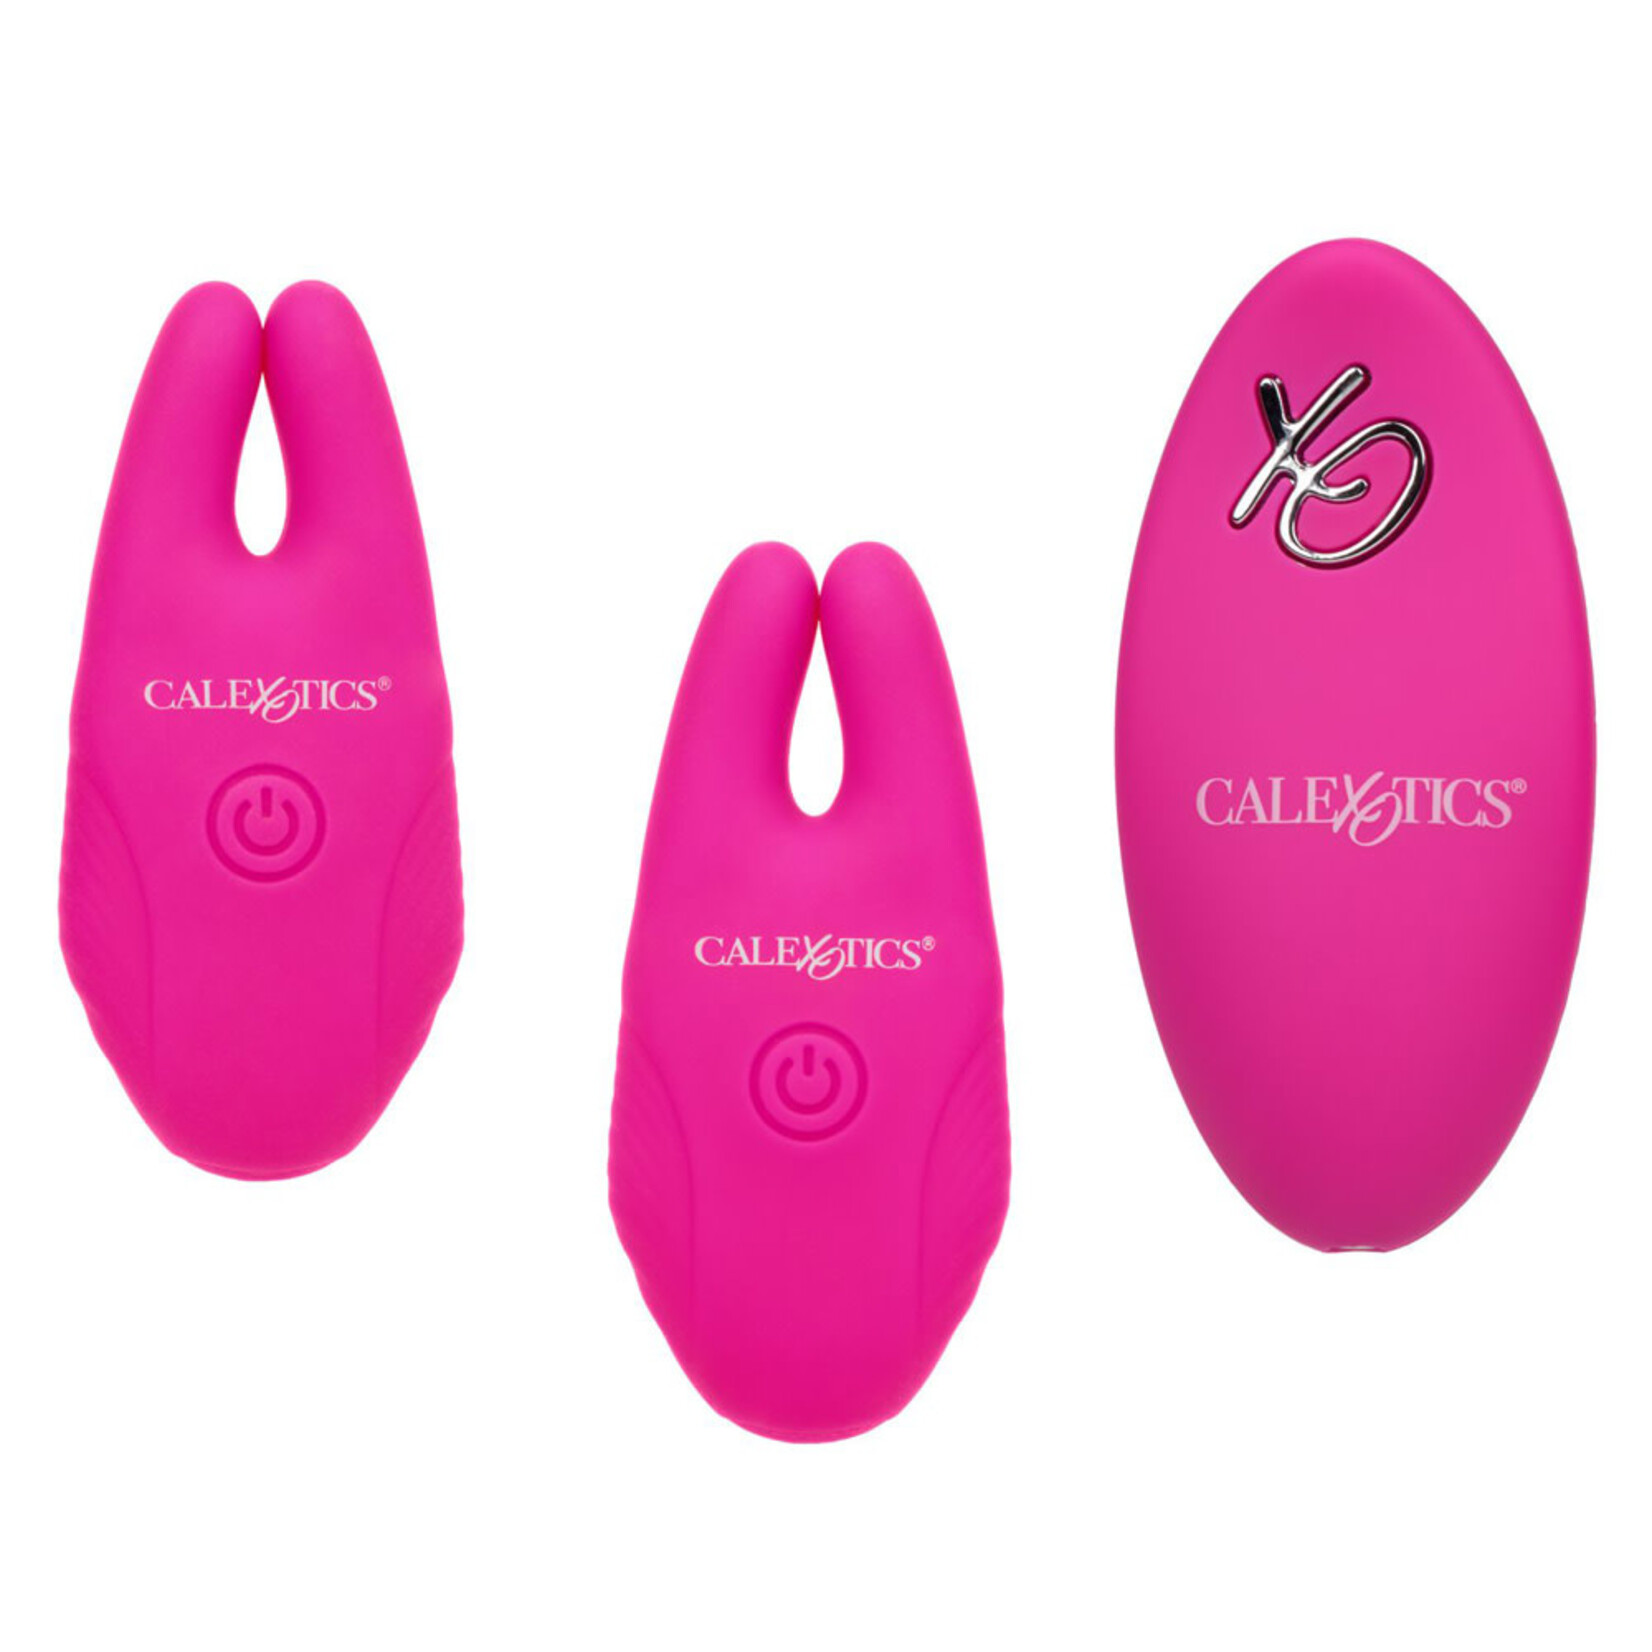 CALEXOTICS REMOTE SILICONE NIPPLE CLAMPS IN PINK